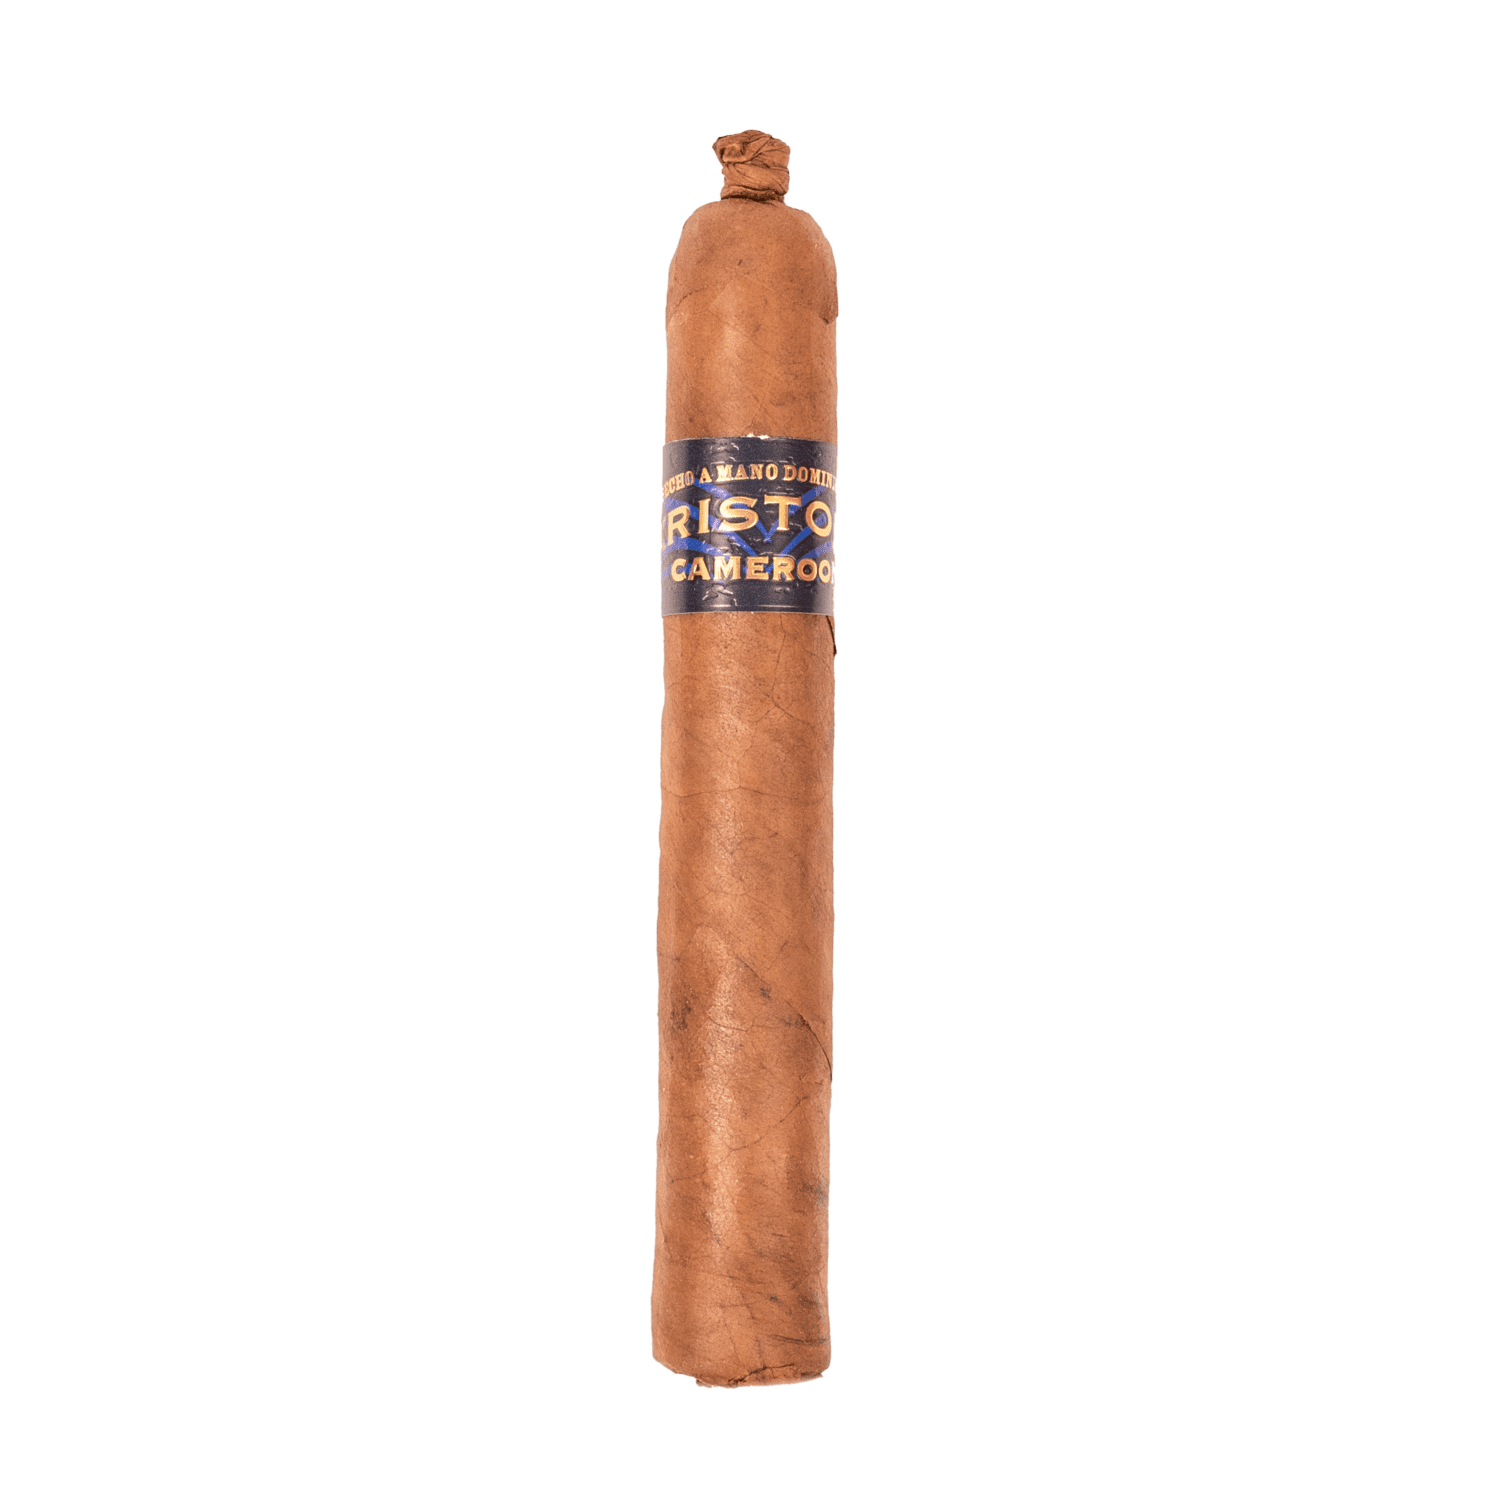 Kristoff Cigars: Cameroon Highly Rated Cigar